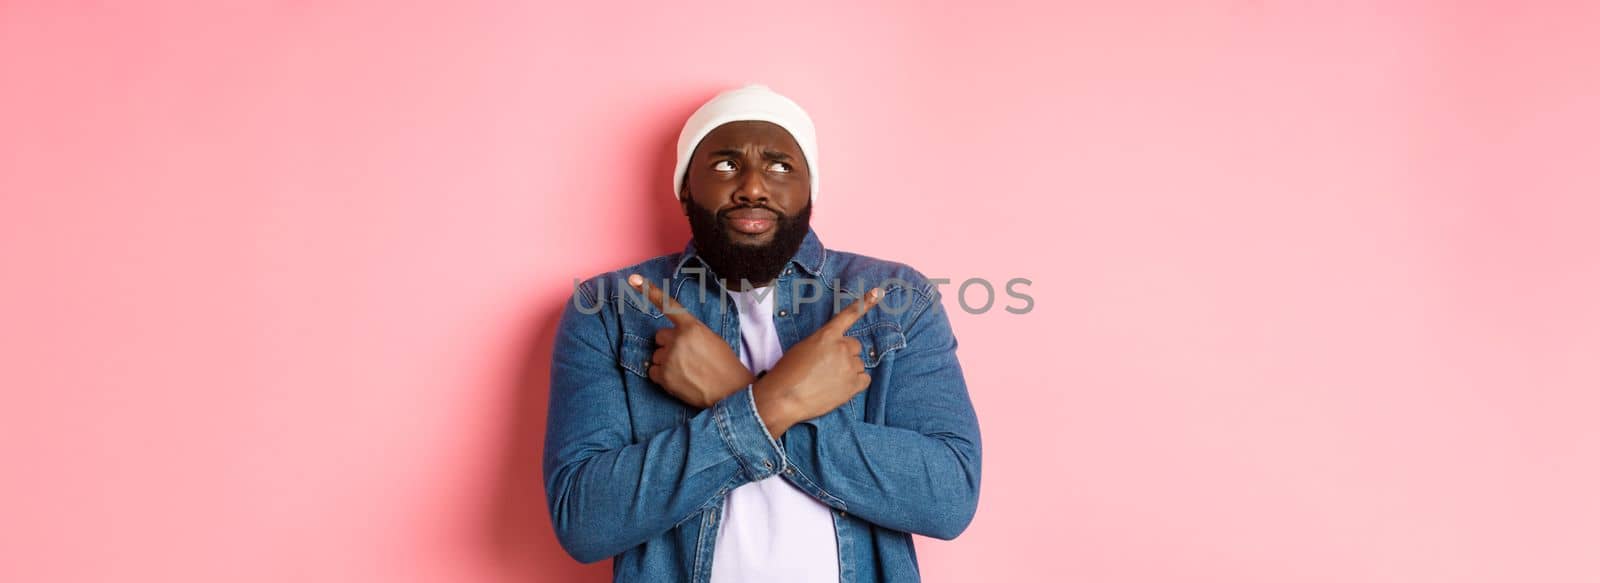 Confused Black man with beard, making choice, pointing fingers sideways and looking puzzled, standing over pink background.